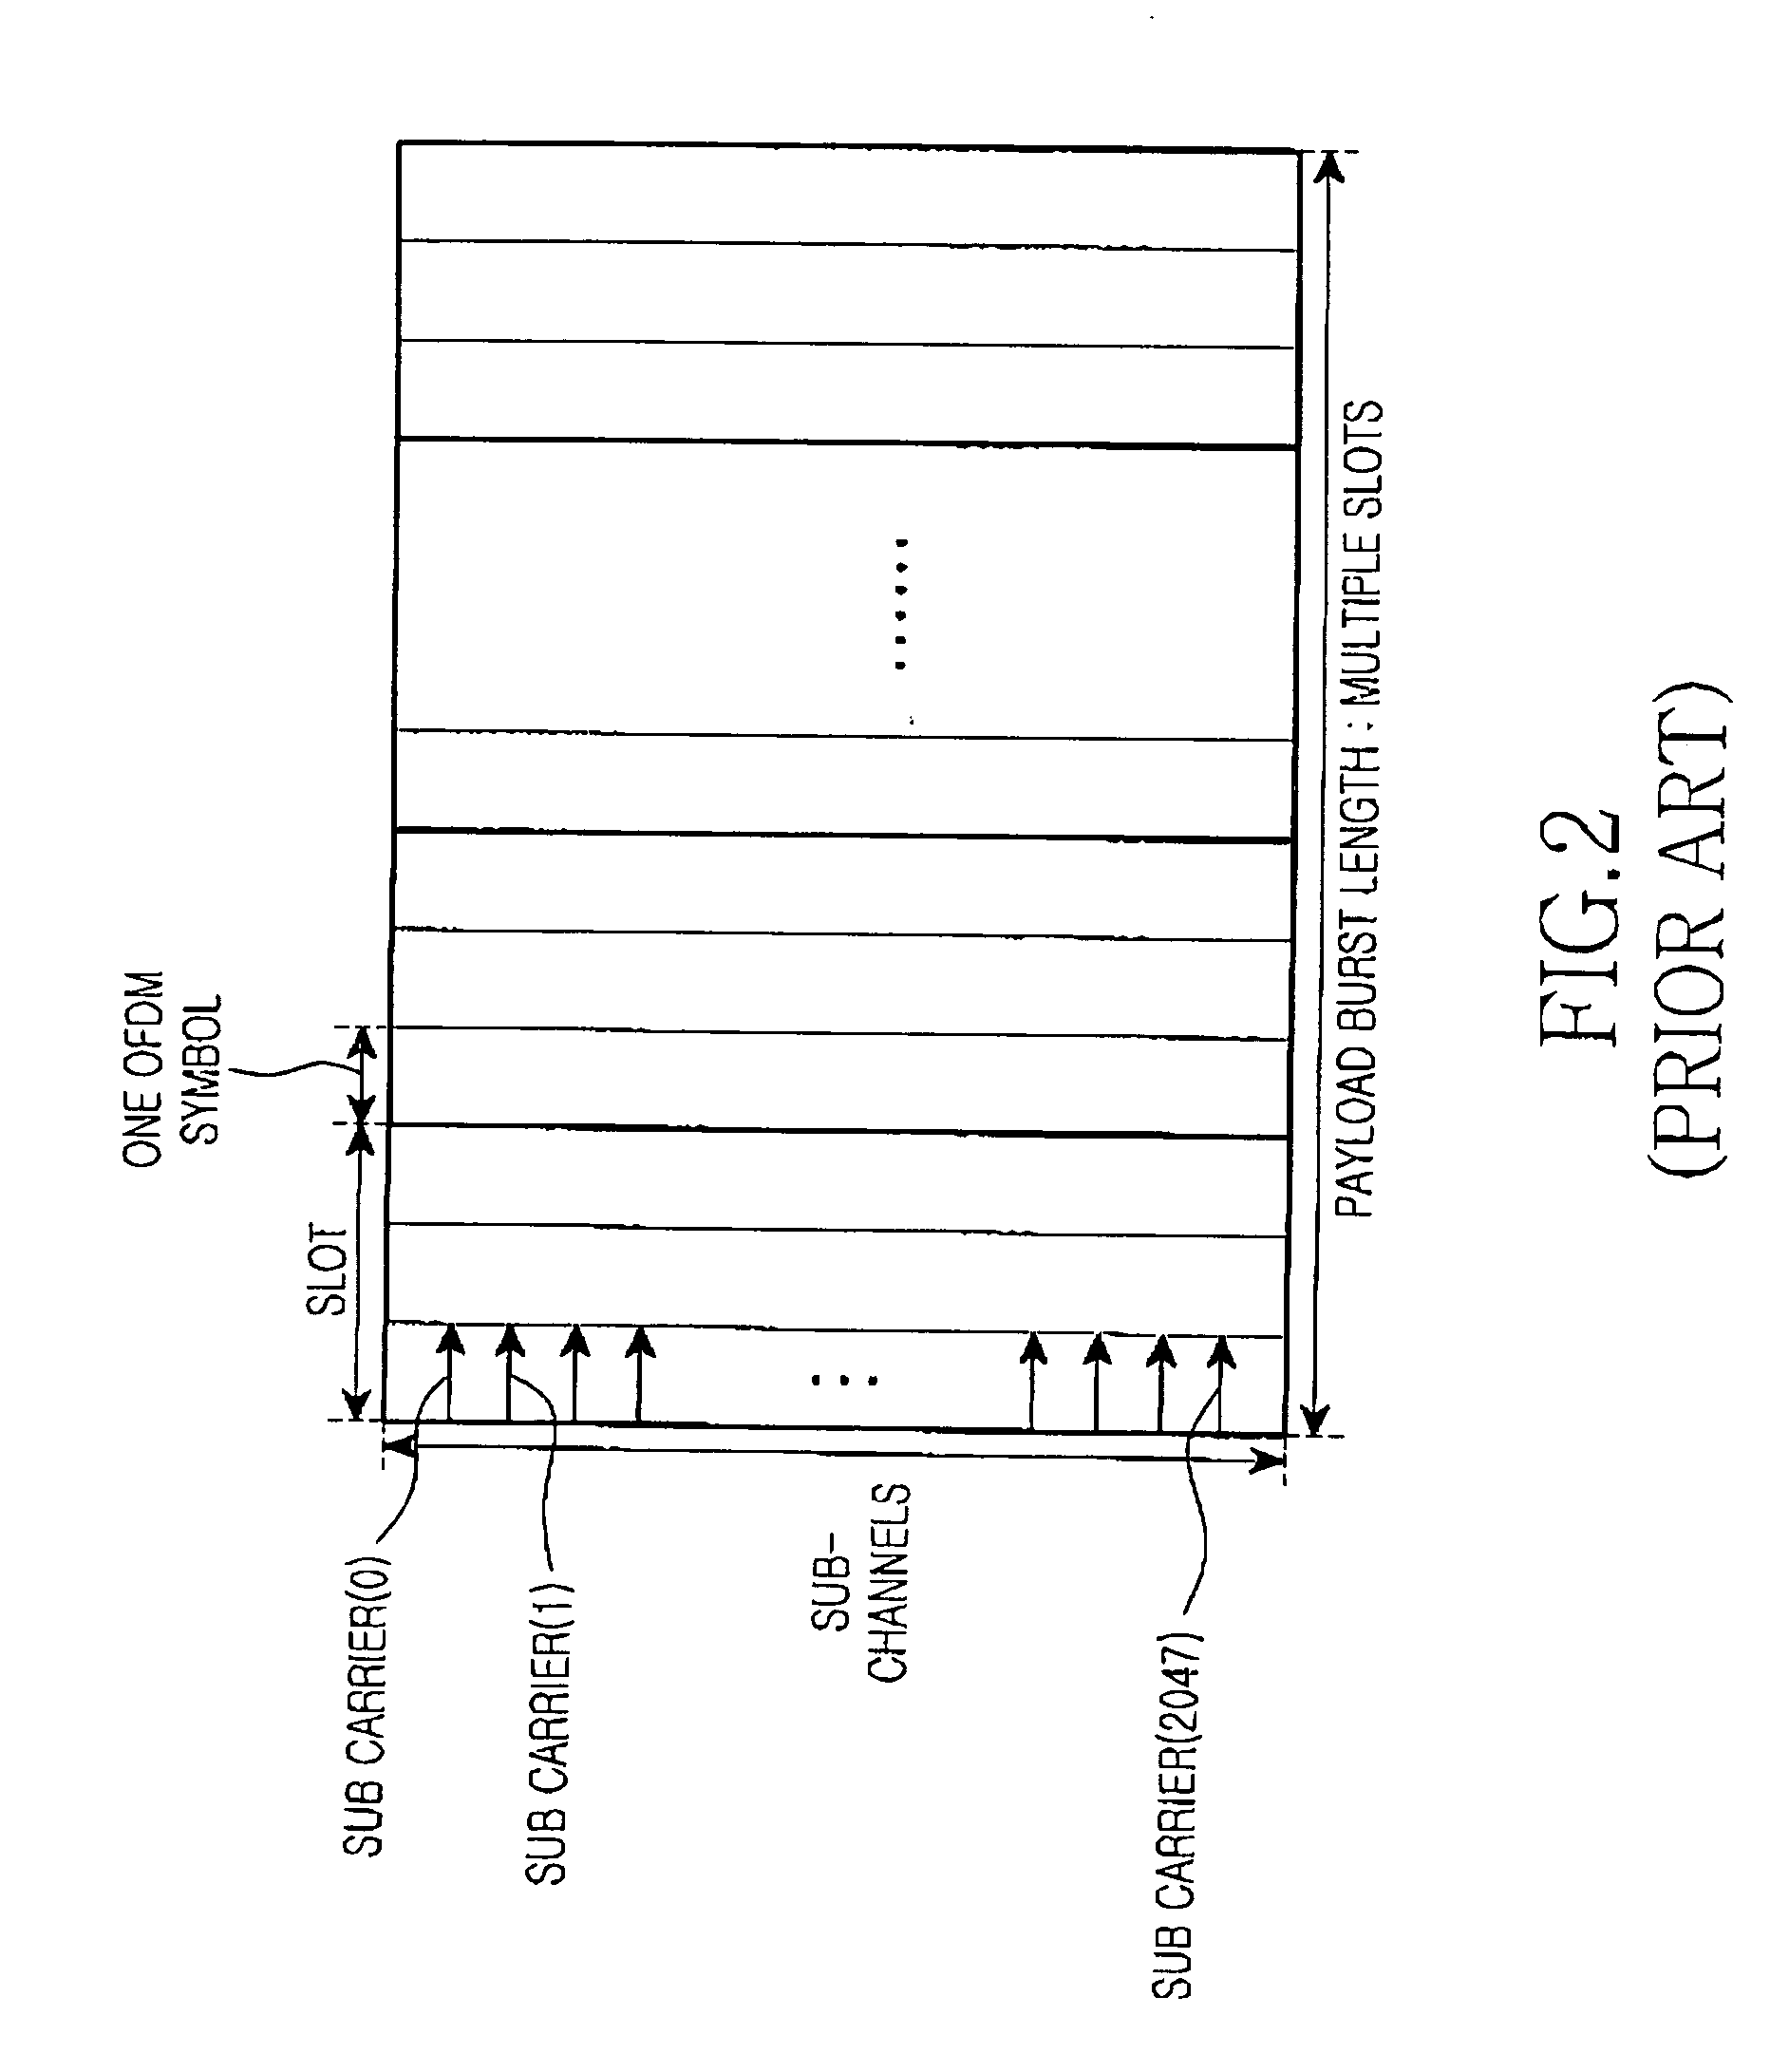 Modulating and coding apparatus and method in a high-rate wireless data communication system